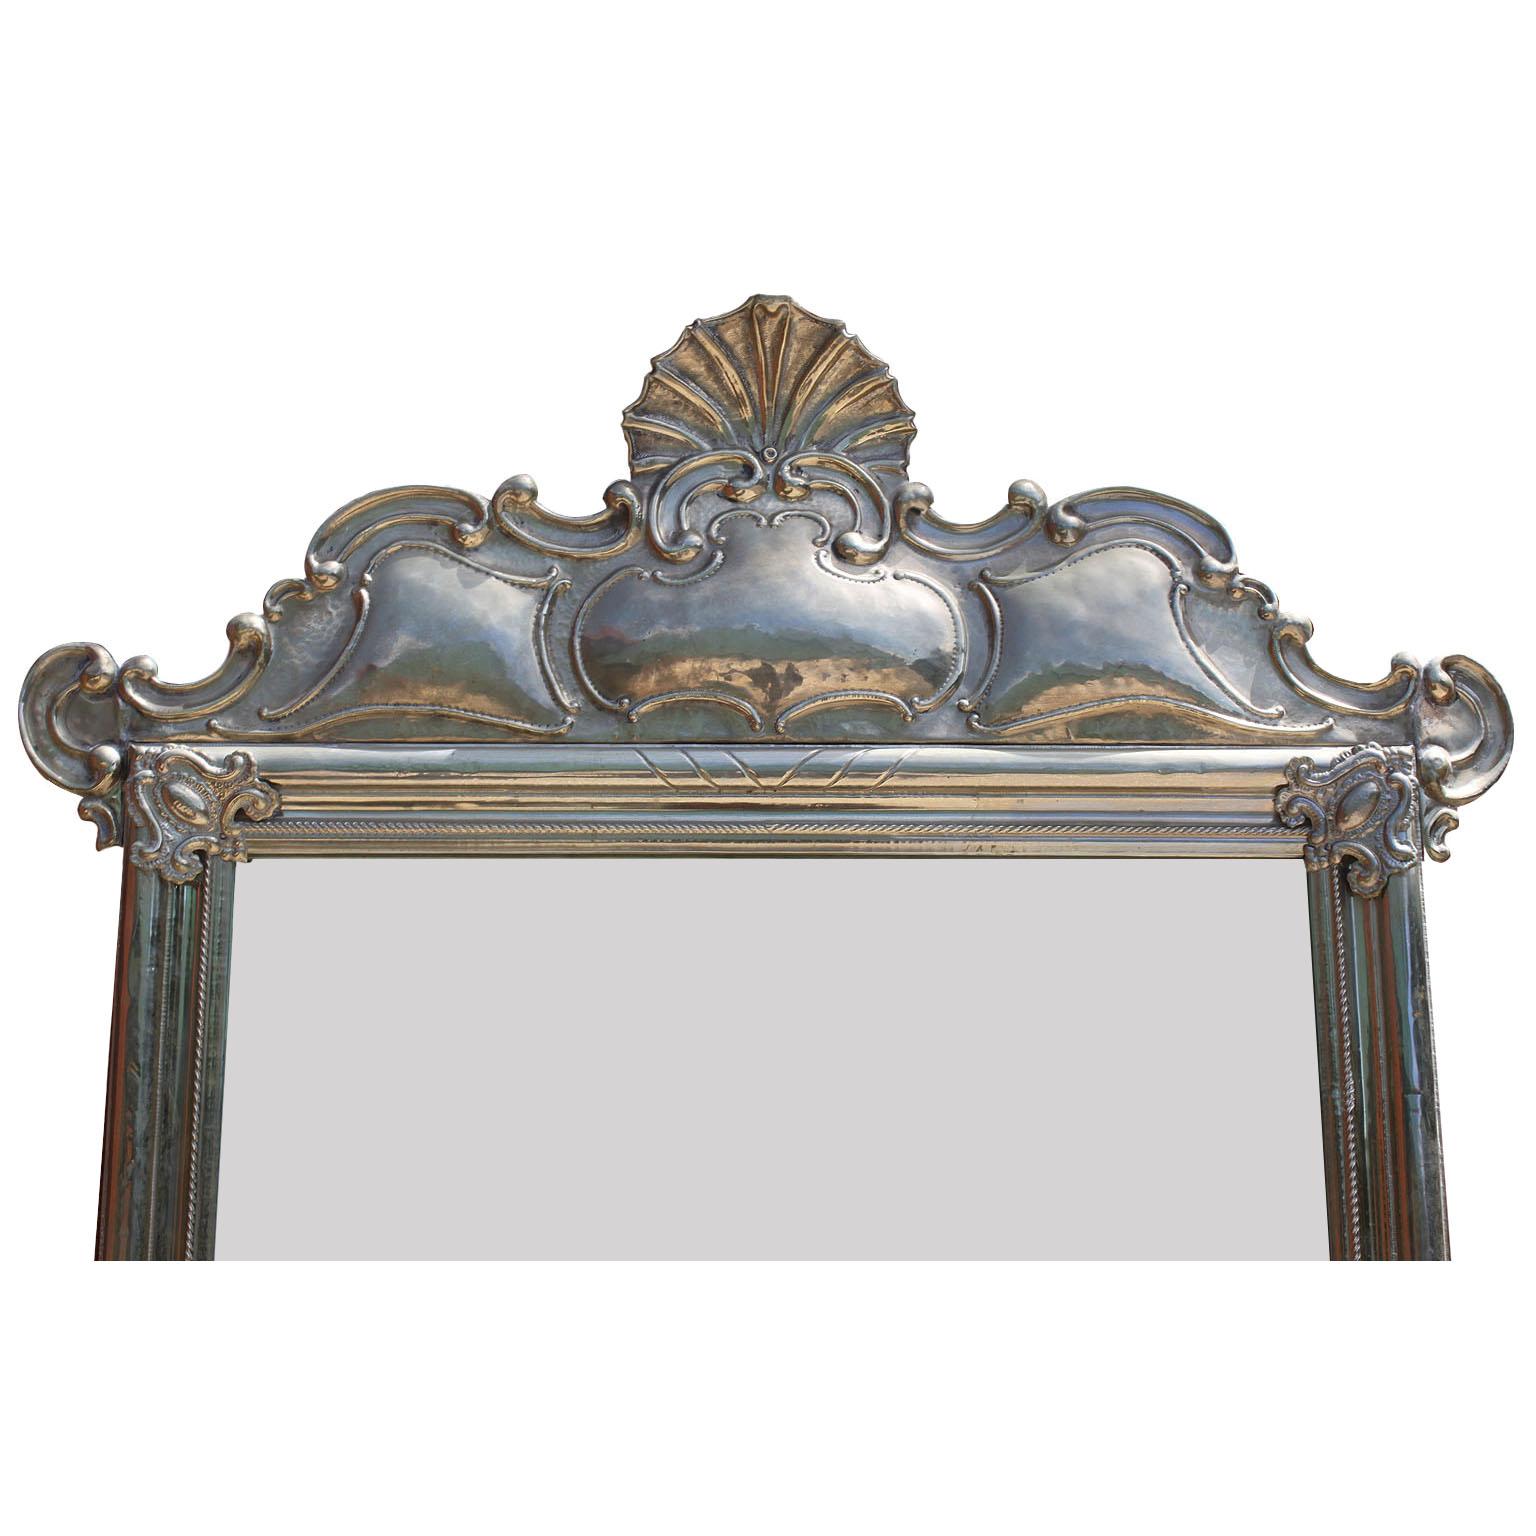 A fine and rare Portuguese embossed Alpaca Silver mirror frame. The elongated frame crowned with a seashell design with a scrolled acanthus trim and corner shields. The bottom with a peacock shaped design with scrolled borders, circa 20th